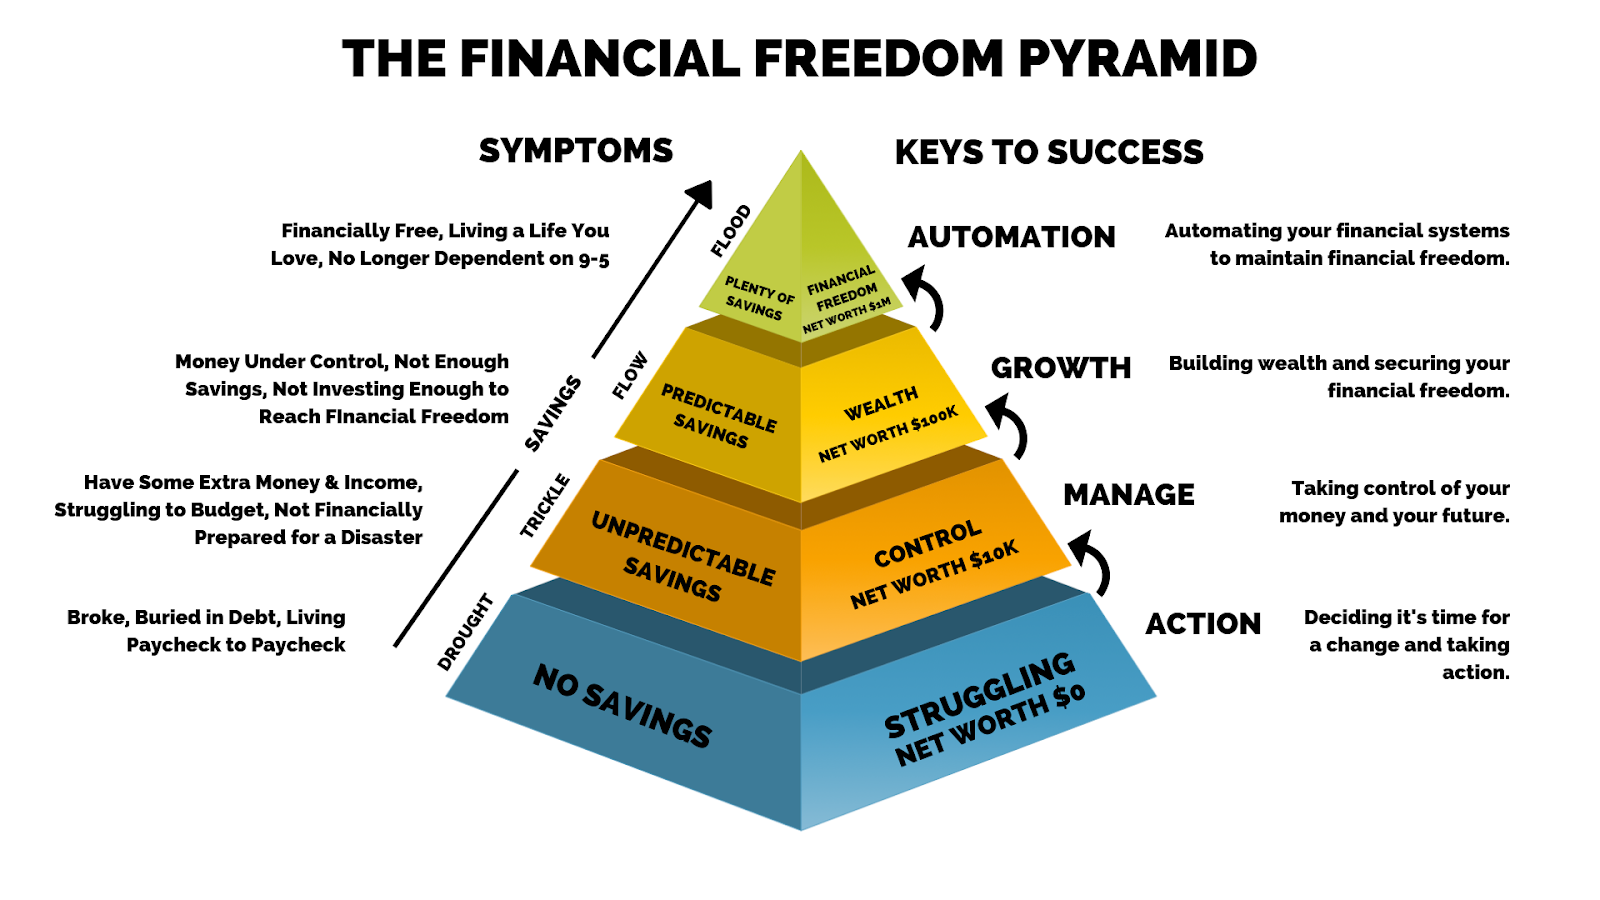 image of the financial freedom pyramid, symptoms, key to success